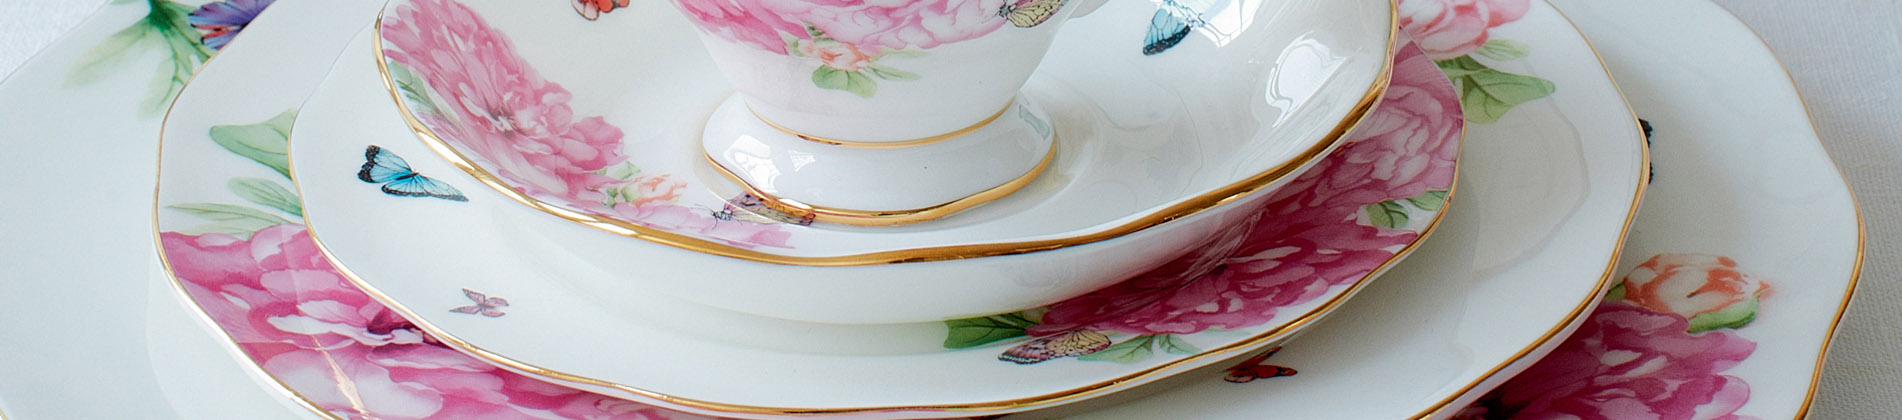 s 16 Piece Set Royal Albert Casual Dinner Place Setting-Rose Confetti NEW